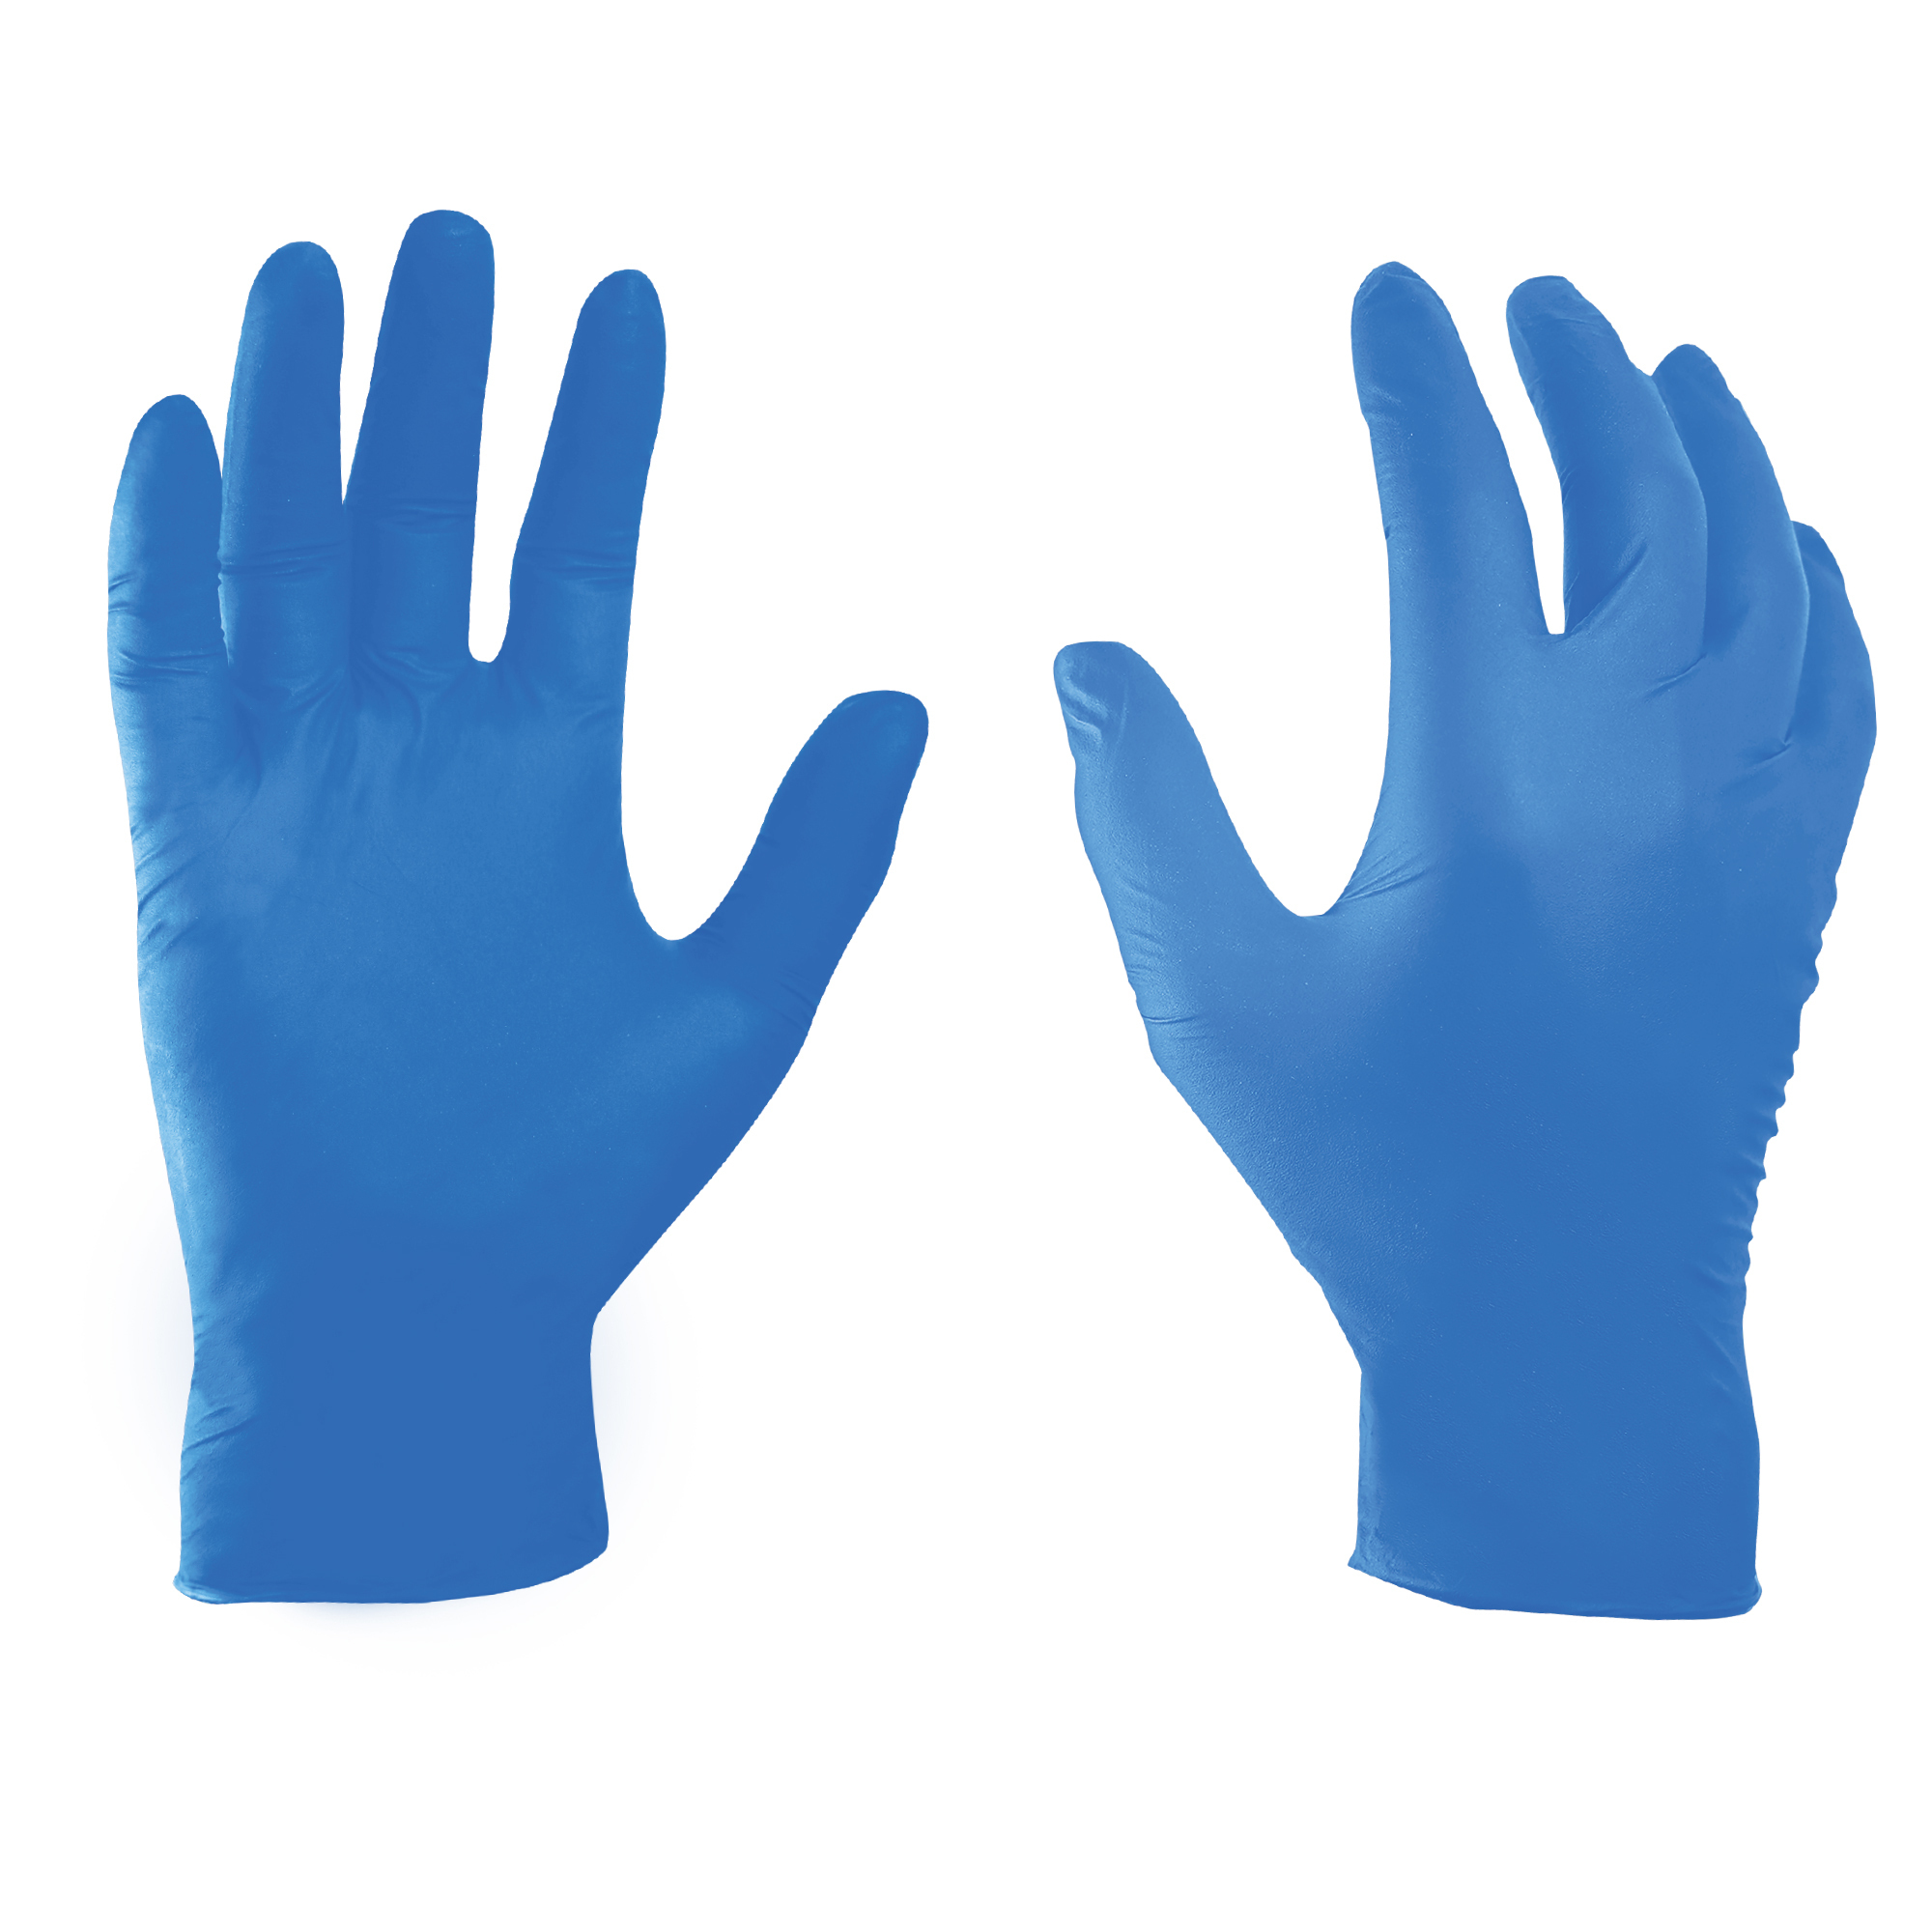 General Electric, 6mil Nitrile Blue Medium Gloves 100pk, Size M, Color Blue, Included (qty.) 100 Model GG610M